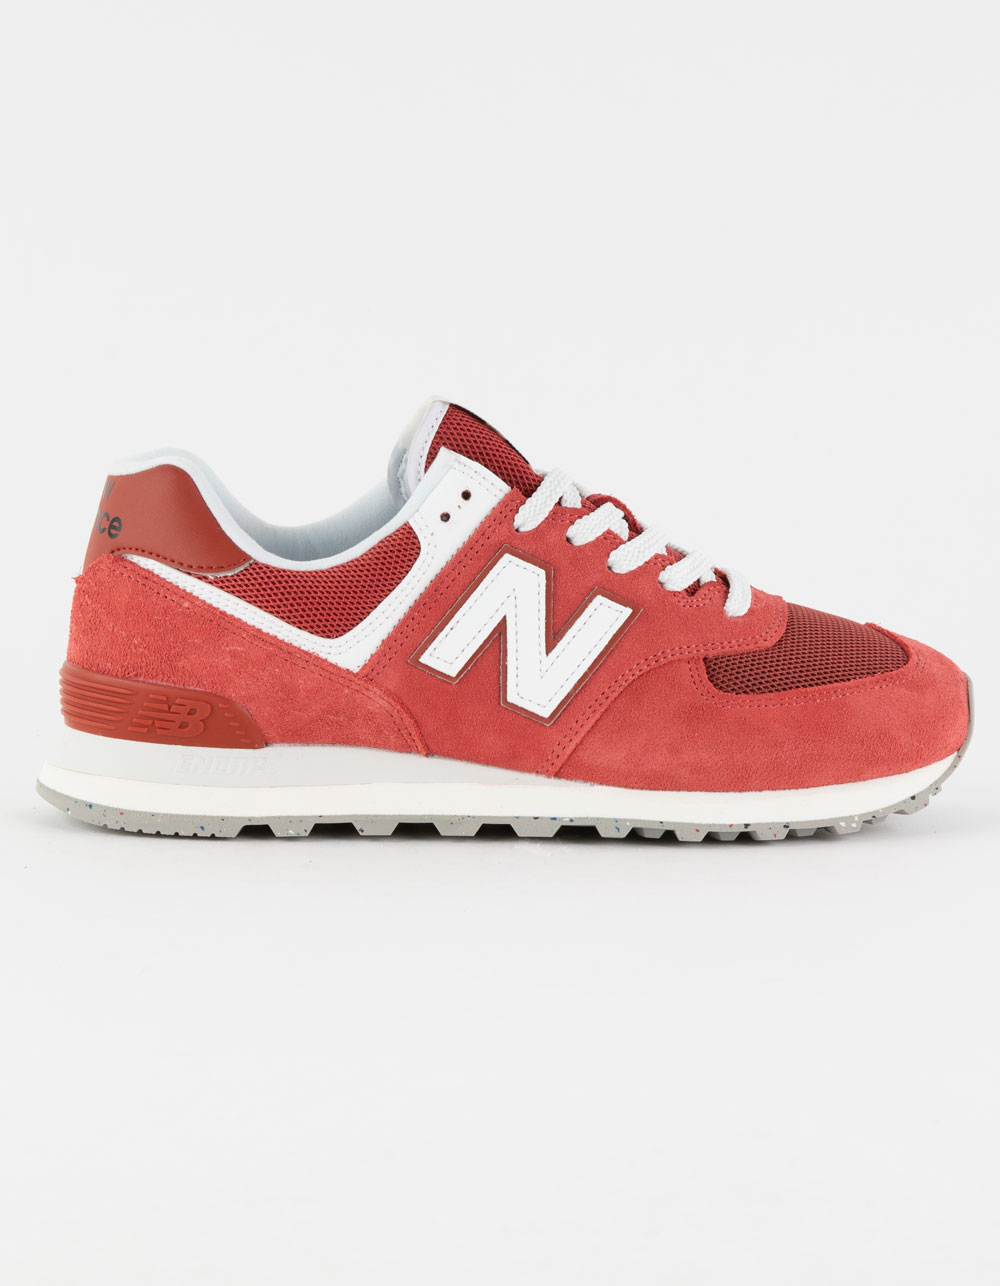 NEW BALANCE 574 Shoes - RED/WHITE | Tillys